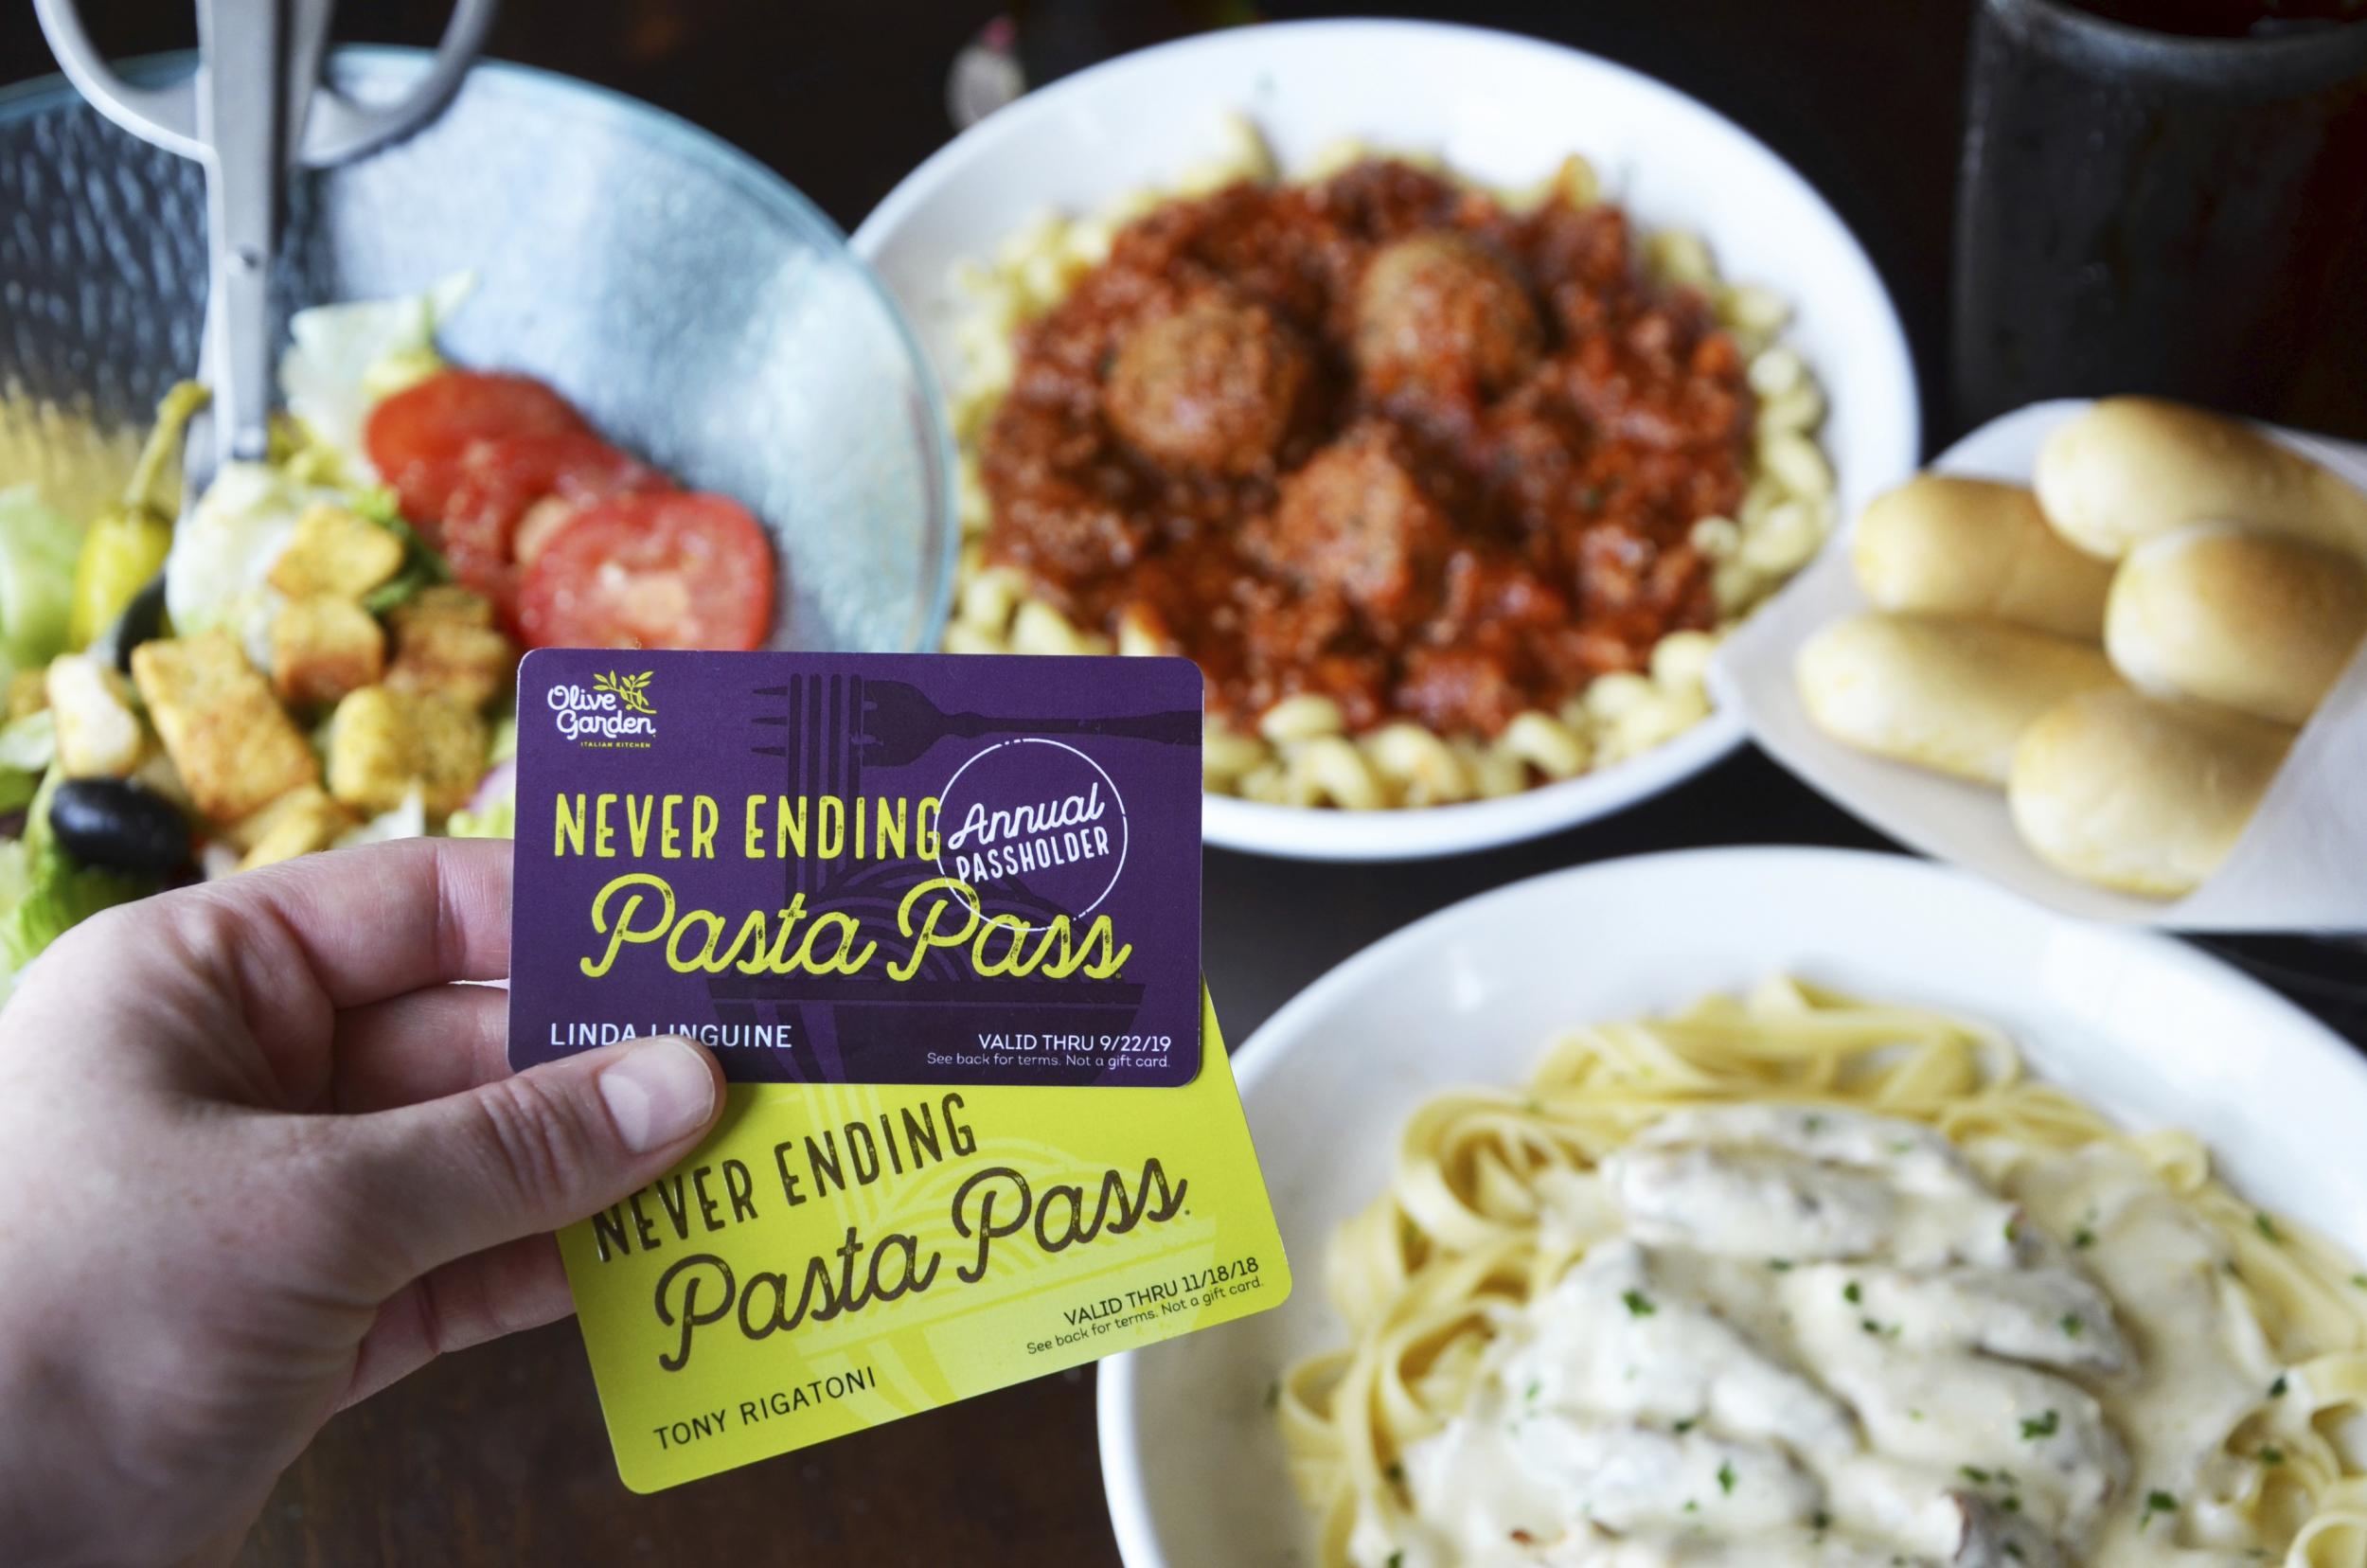 Olive Garden has a new annual pasta pass